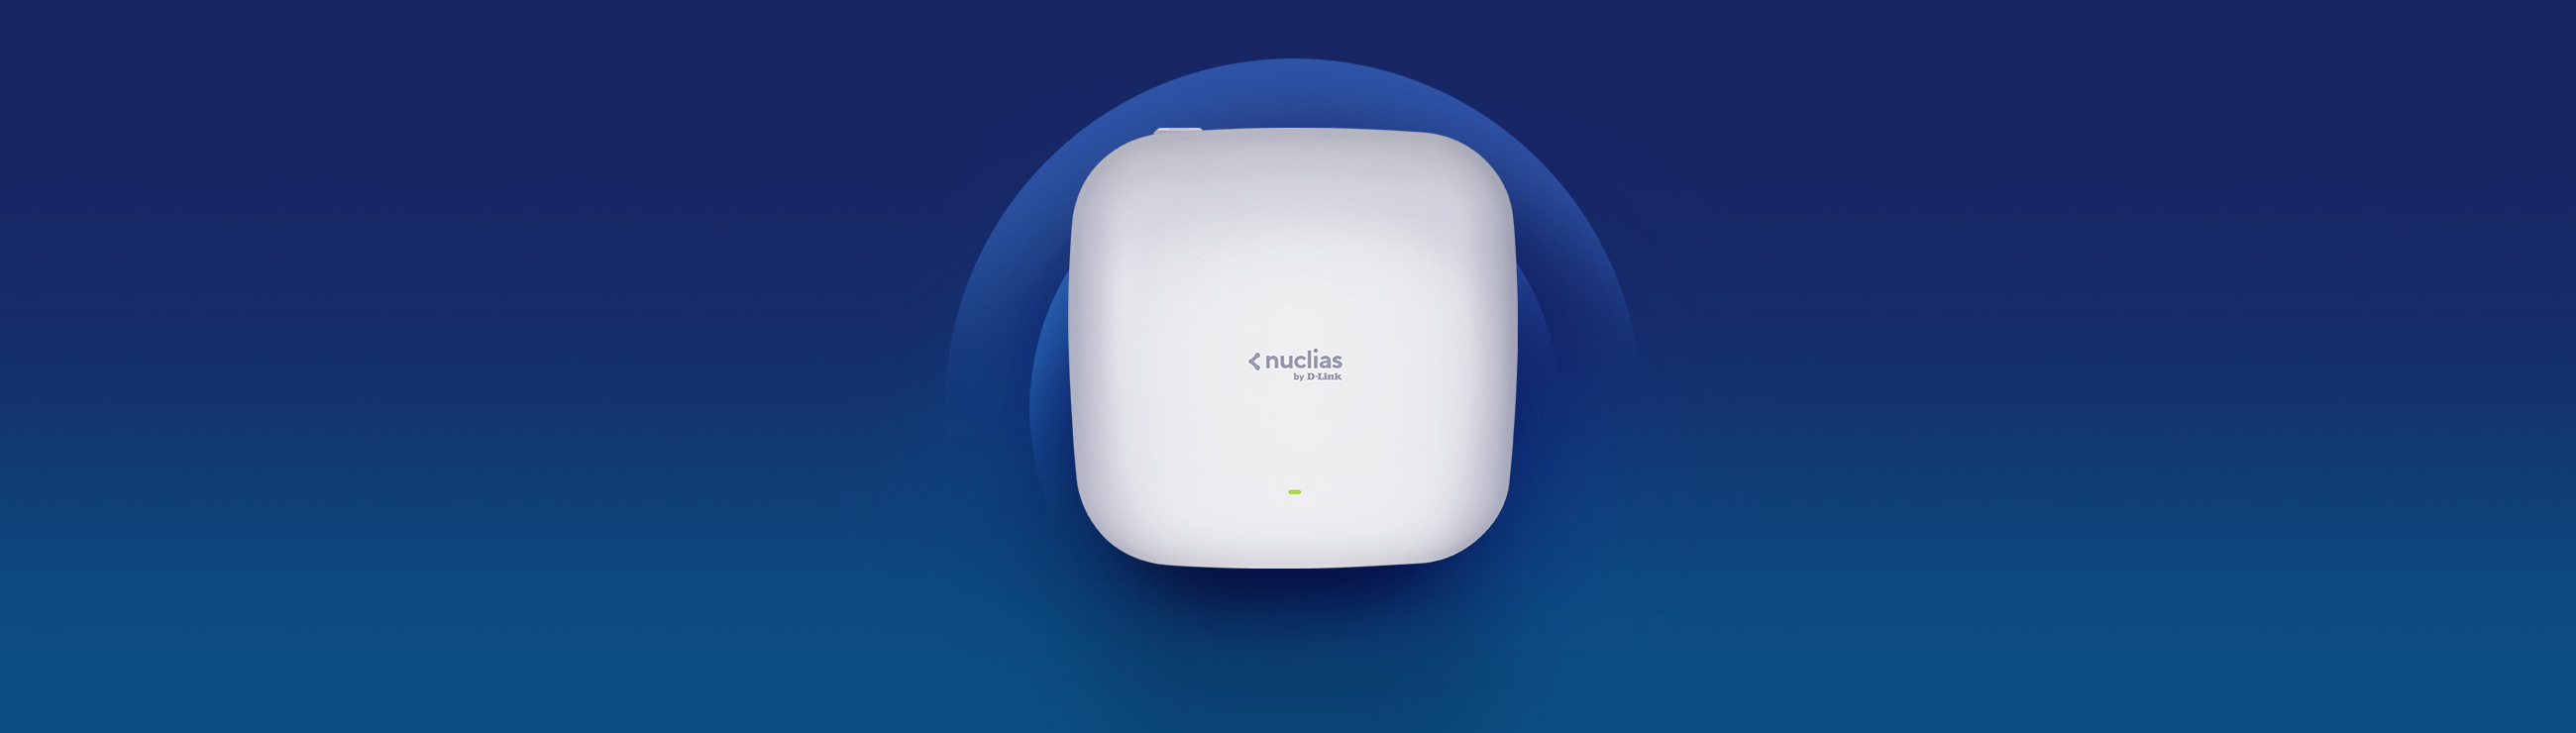 DAP-X2850 Nuclias Connect - AX3600 Wi-Fi 6 Dual-Band PoE Access Point with blue background and wireless waves.